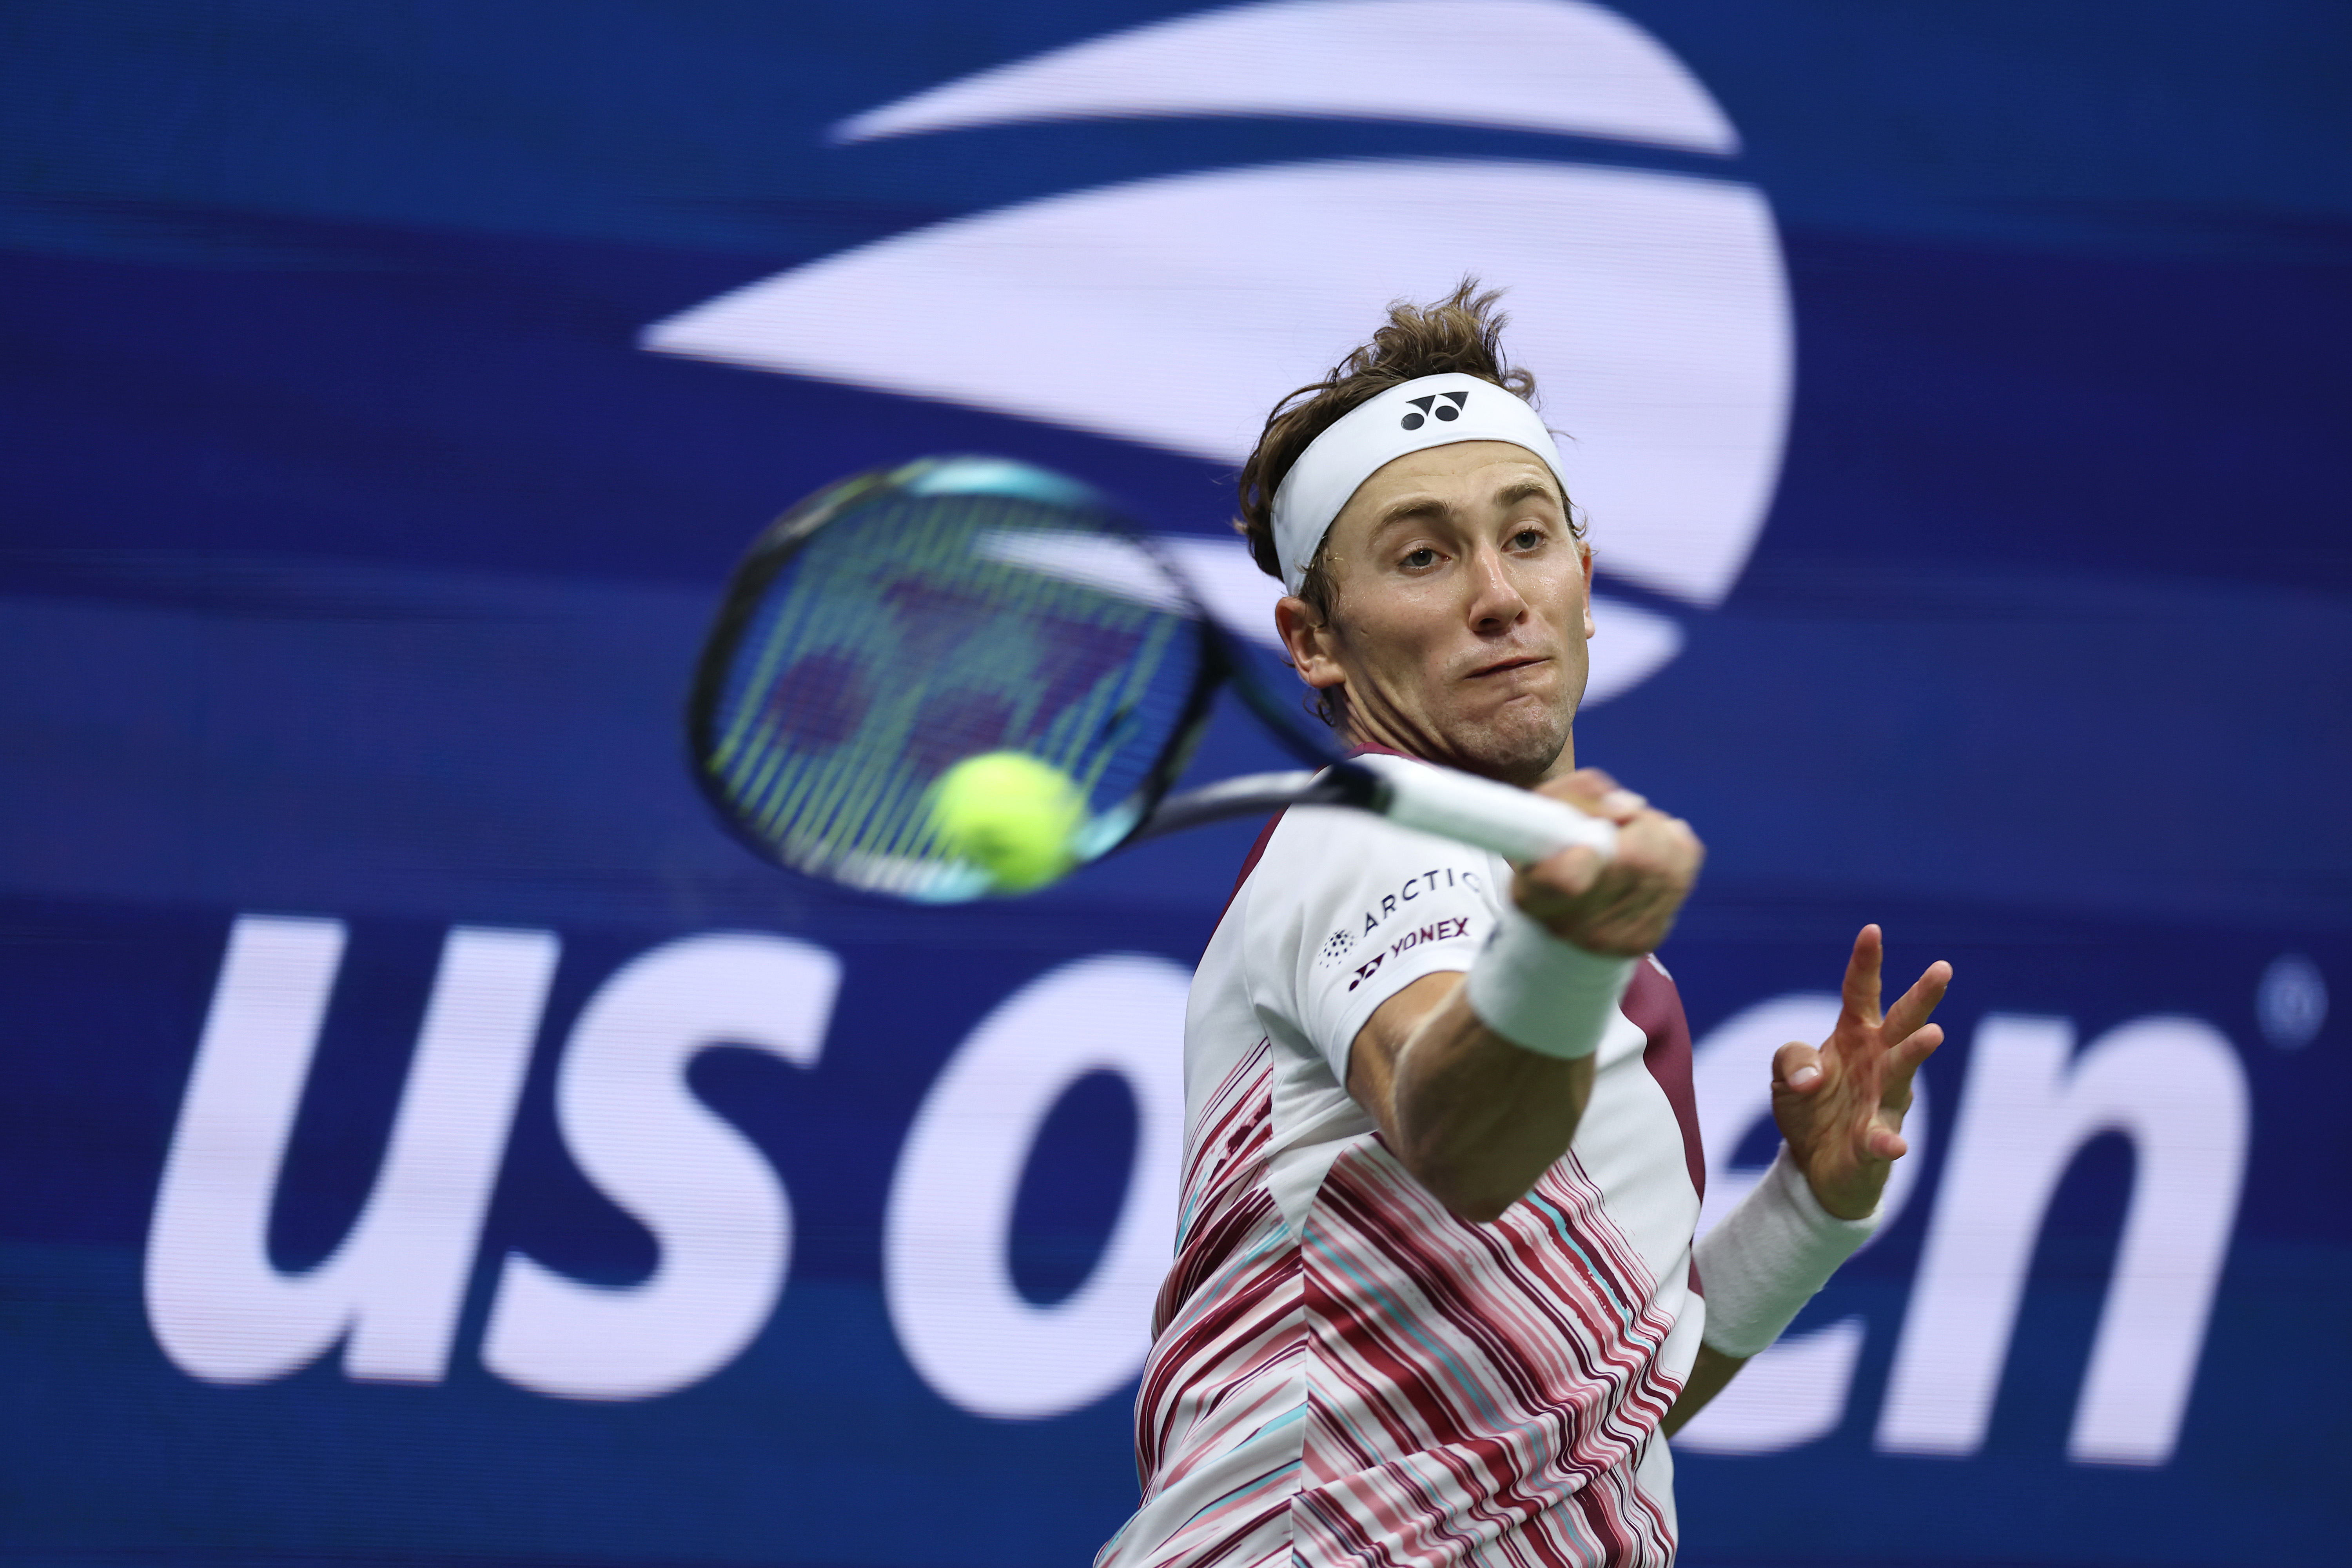 Casper Ruud of Norway returns a shot against Matteo Berrettini of Italy during their Men’s Singles Quarterfinal match on Day Nine of the 2022 US Open at USTA Billie Jean King National Tennis Center on September 06, 2022 in the Flushing neighborhood of the Queens borough of New York City.